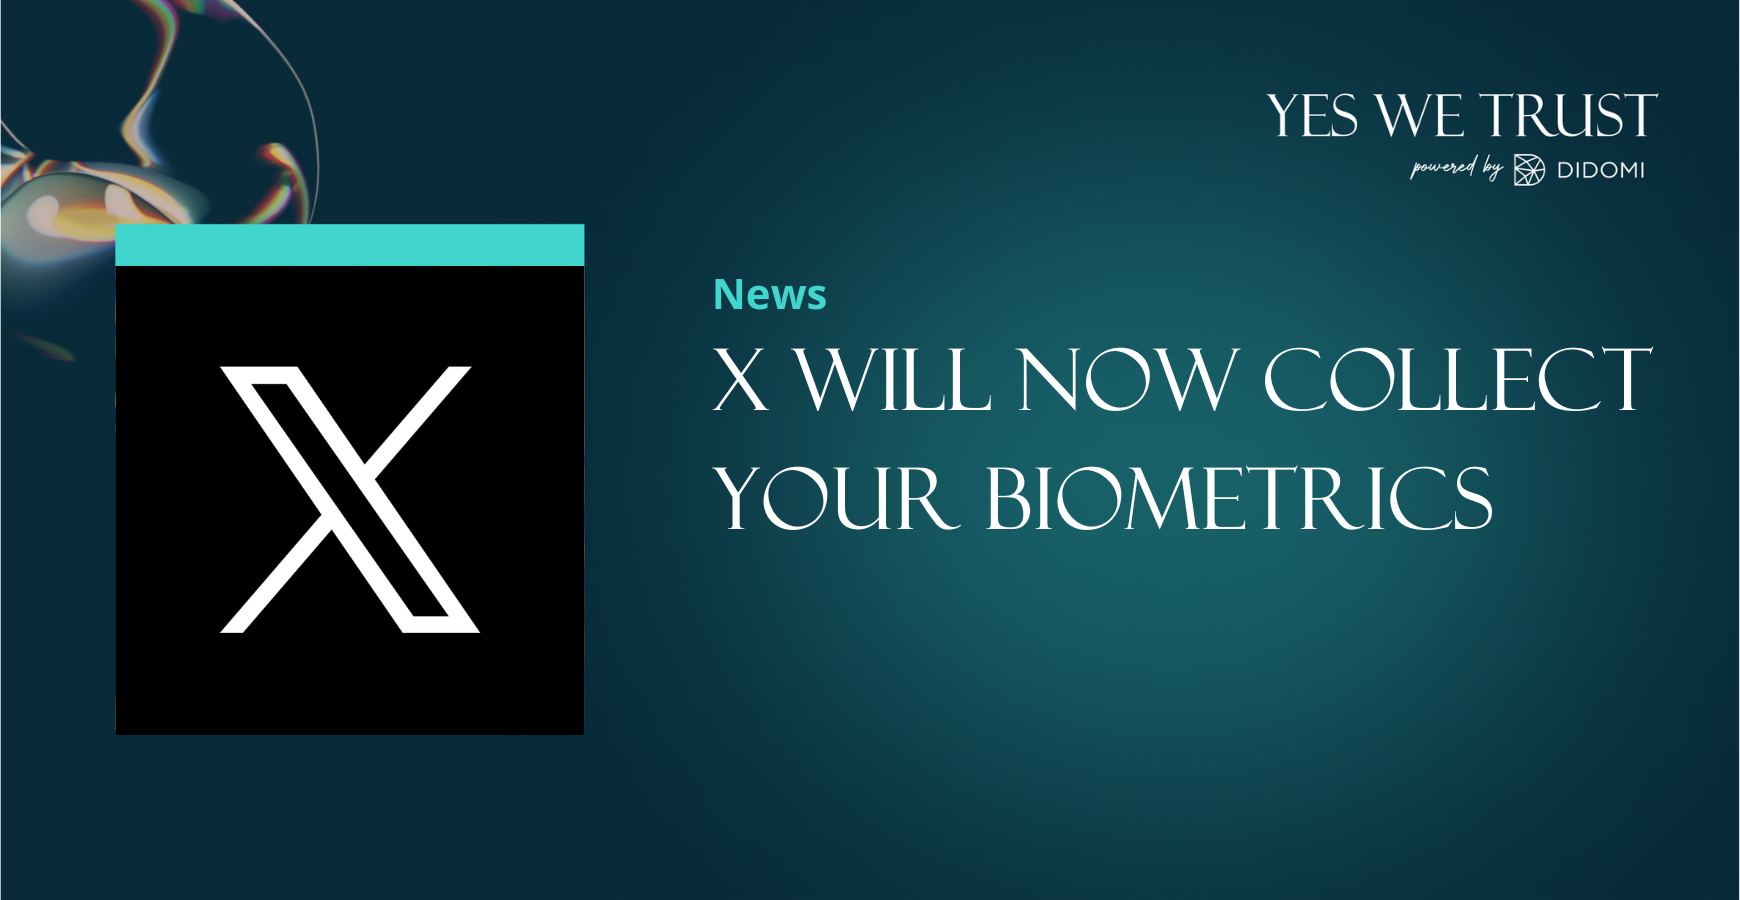 X, formerly known as Twitter, will now collect your Biometrics